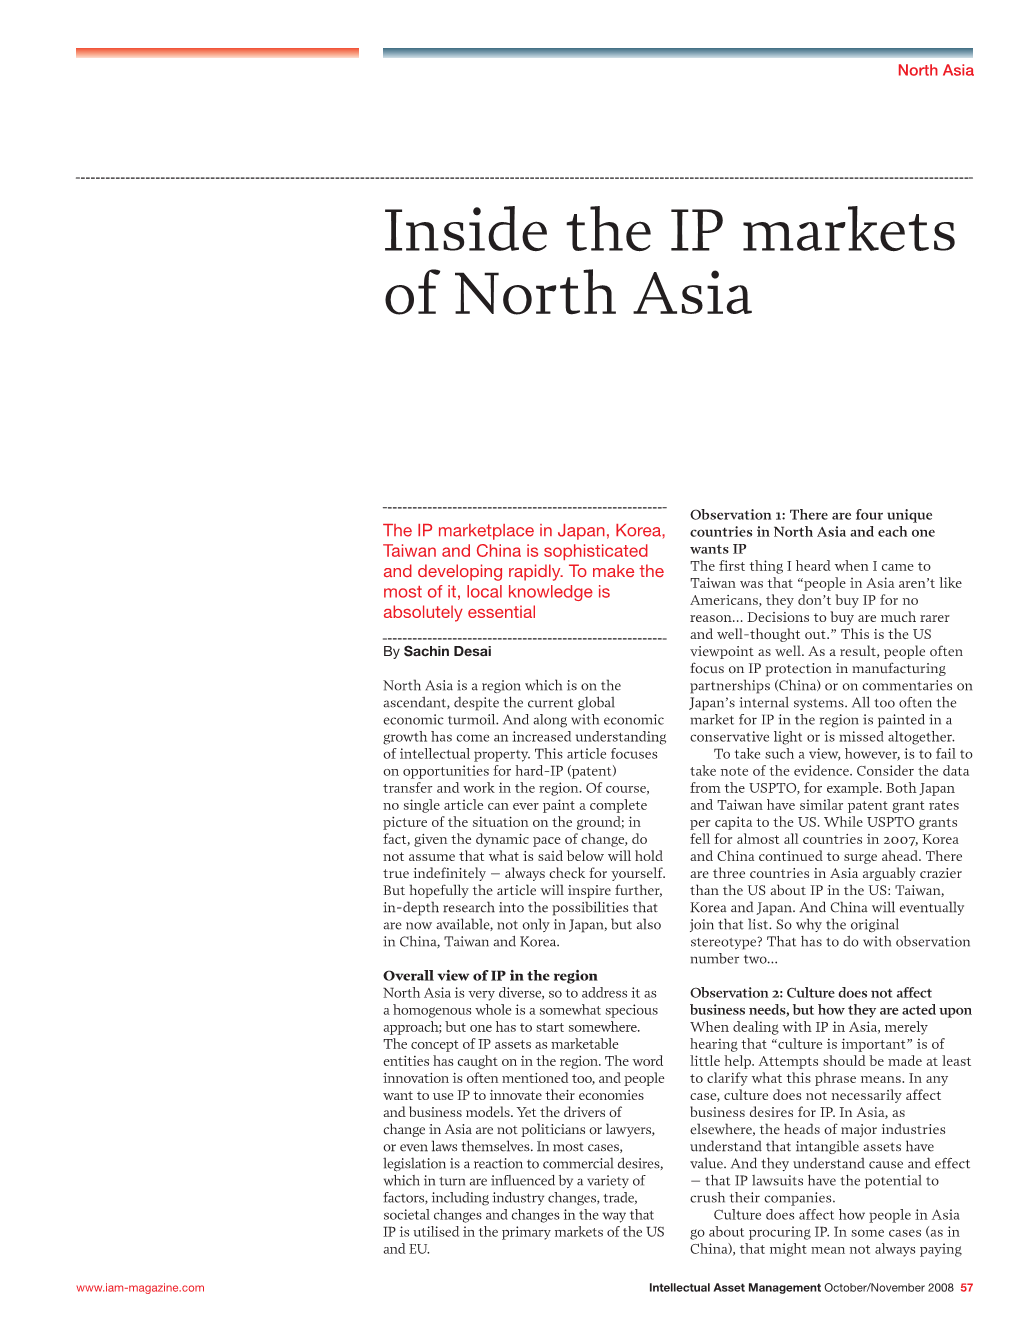 Inside the IP Markets of North Asia